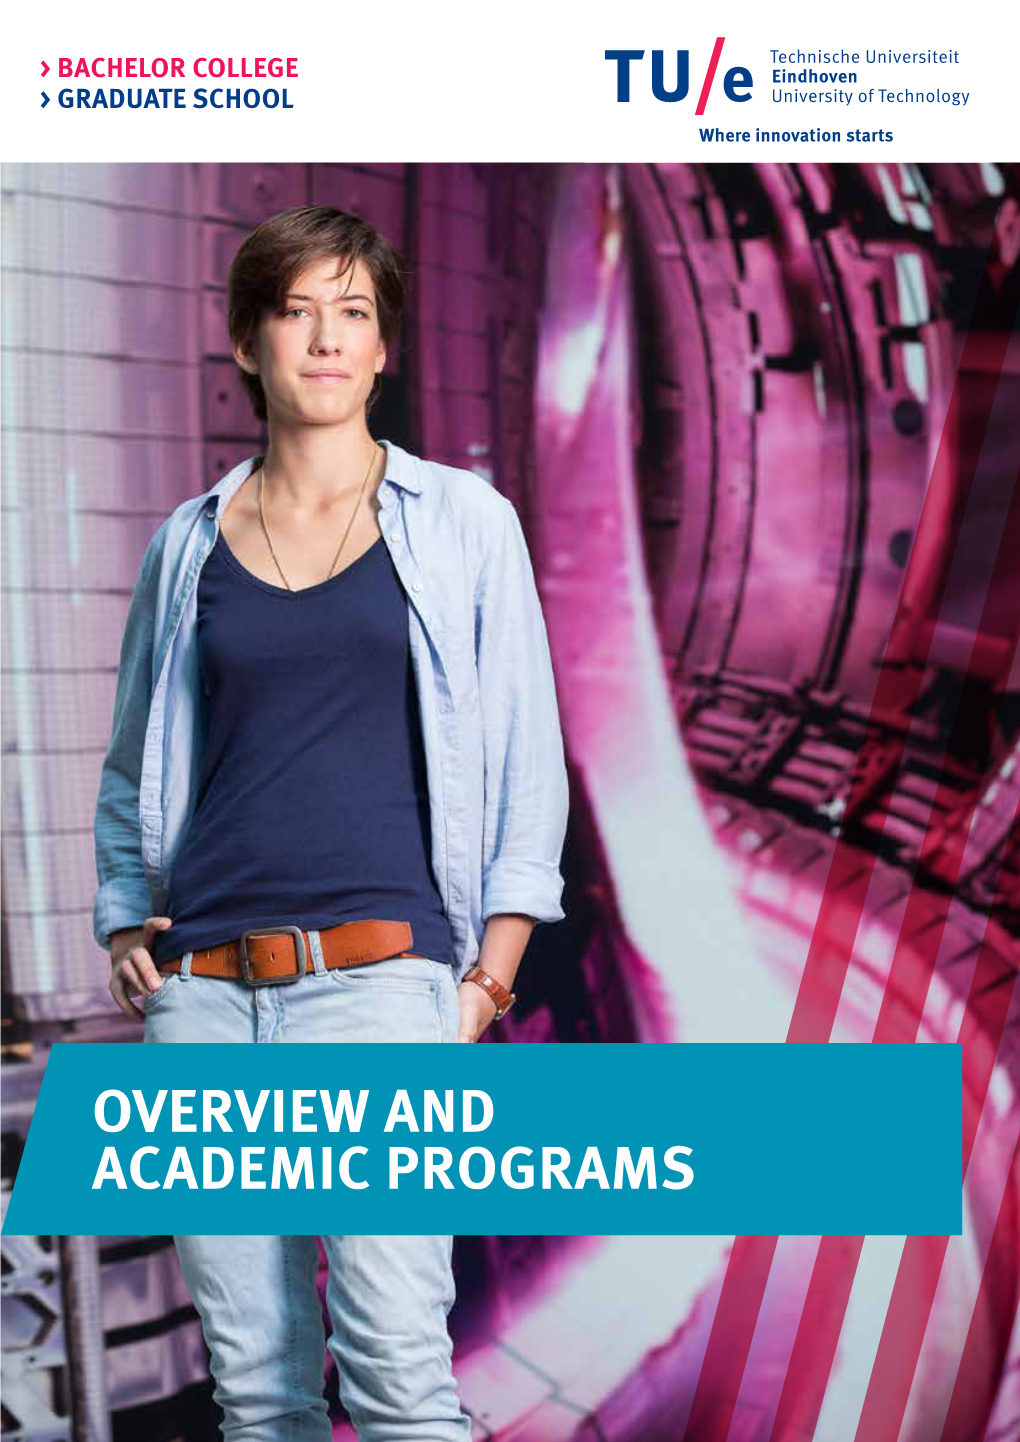 Graduate Programs at the Bachelor College and Graduate Programs at the Graduate School